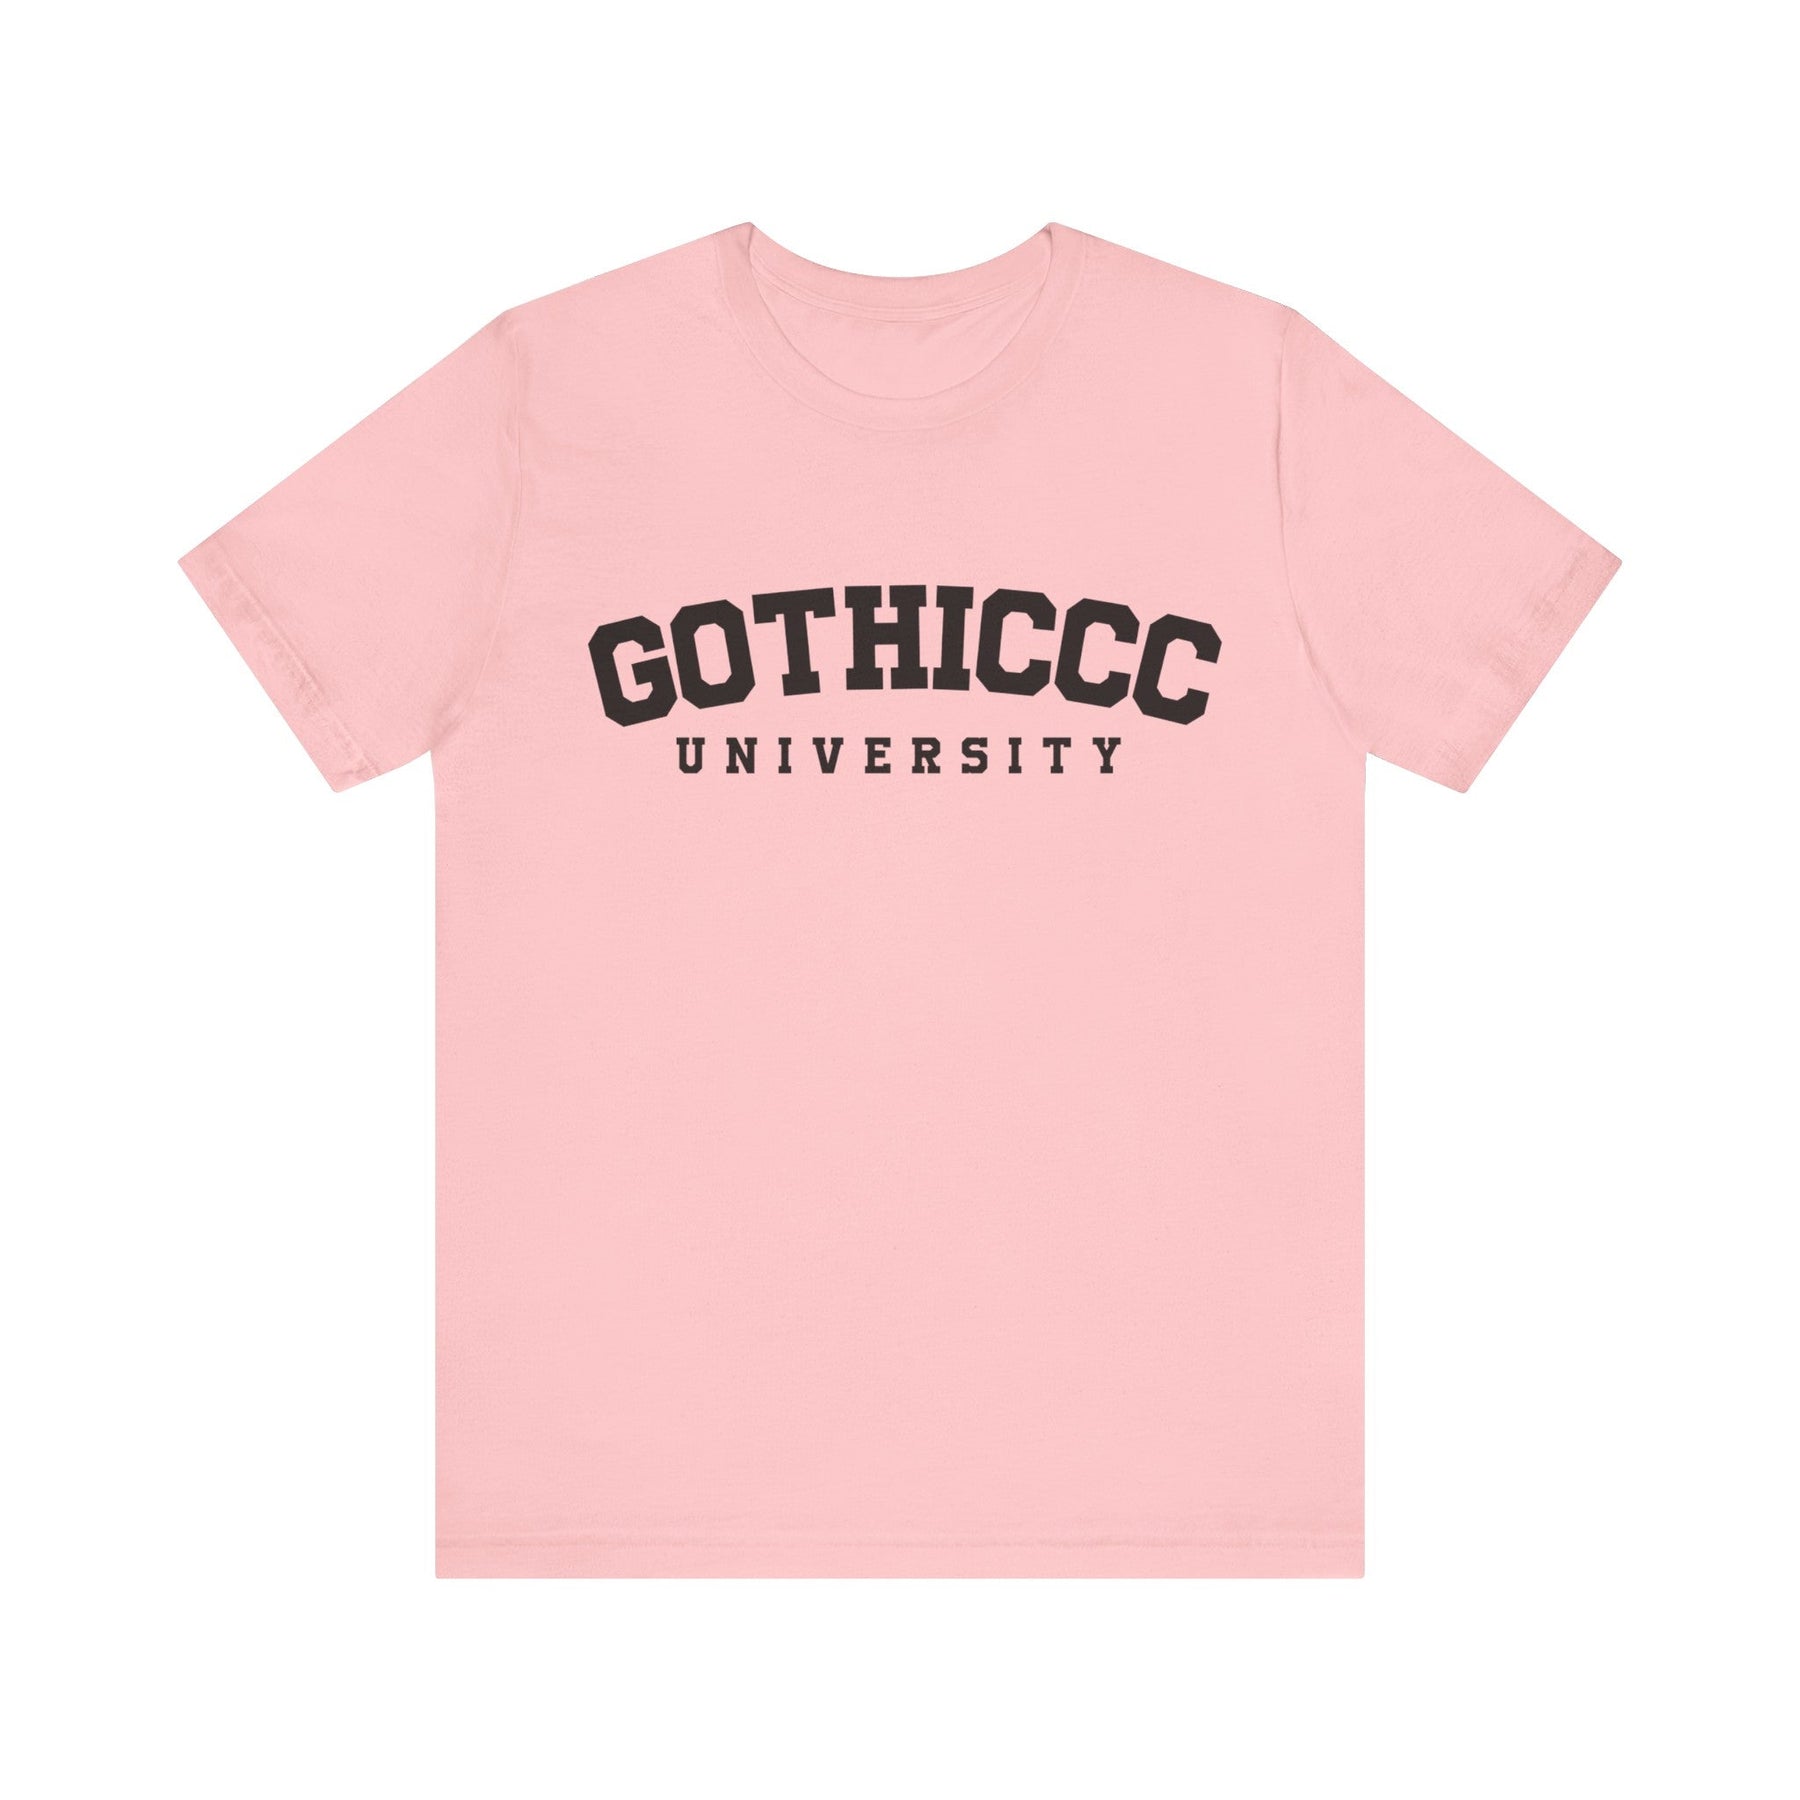 Gothiccc University Short Sleeve Tee - Goth Cloth Co.T - Shirt20016803068207624849